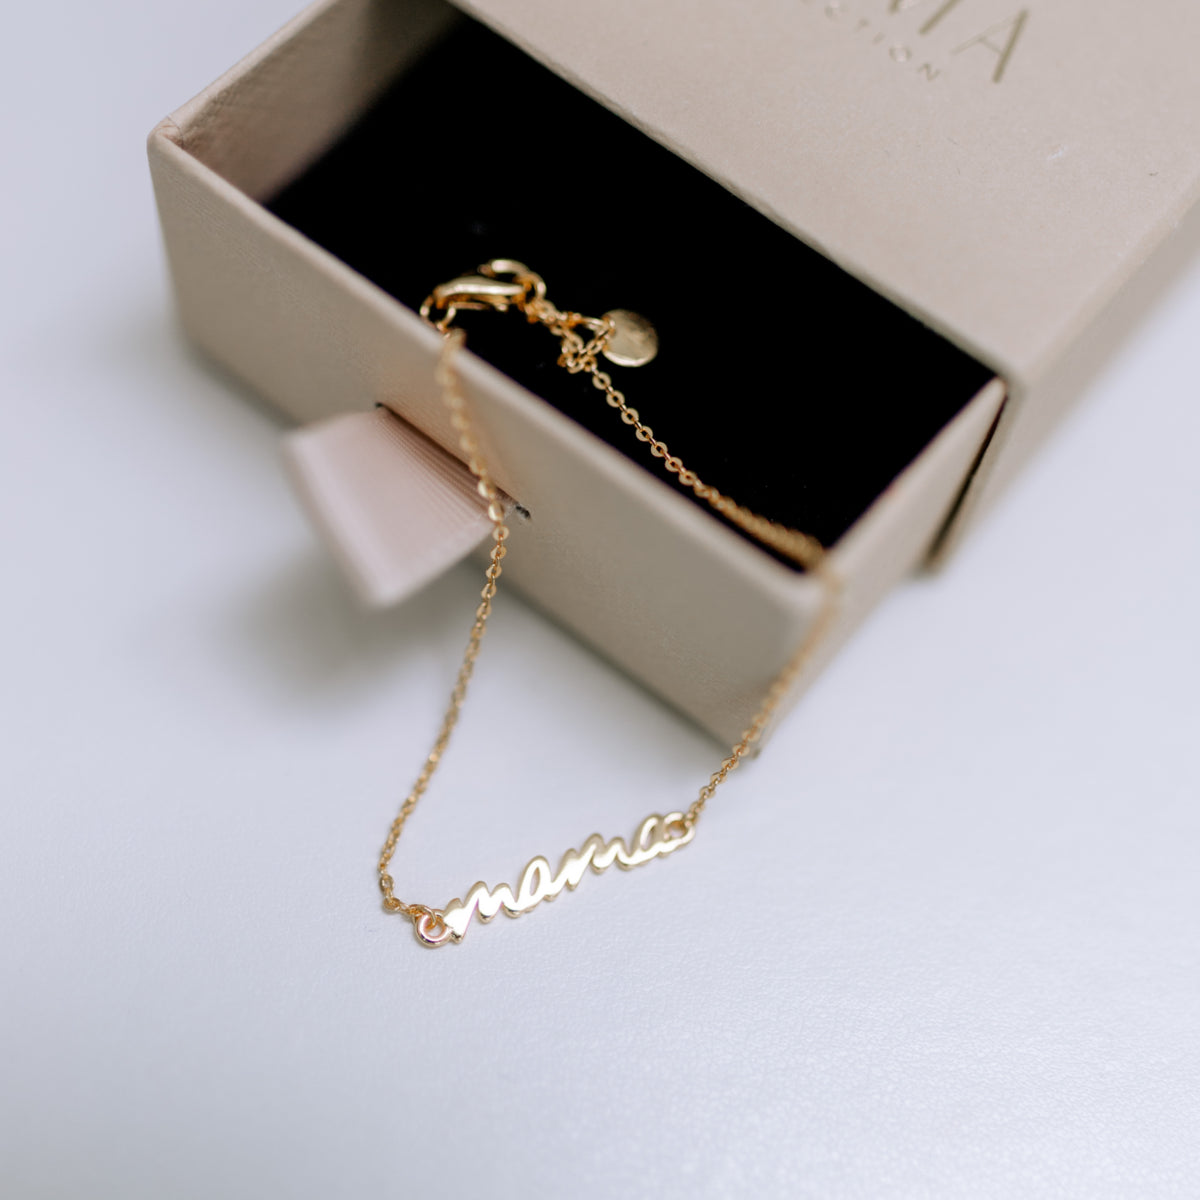 "Chain Love" MAMA GOLD chain bracelet - 18k gold pleated